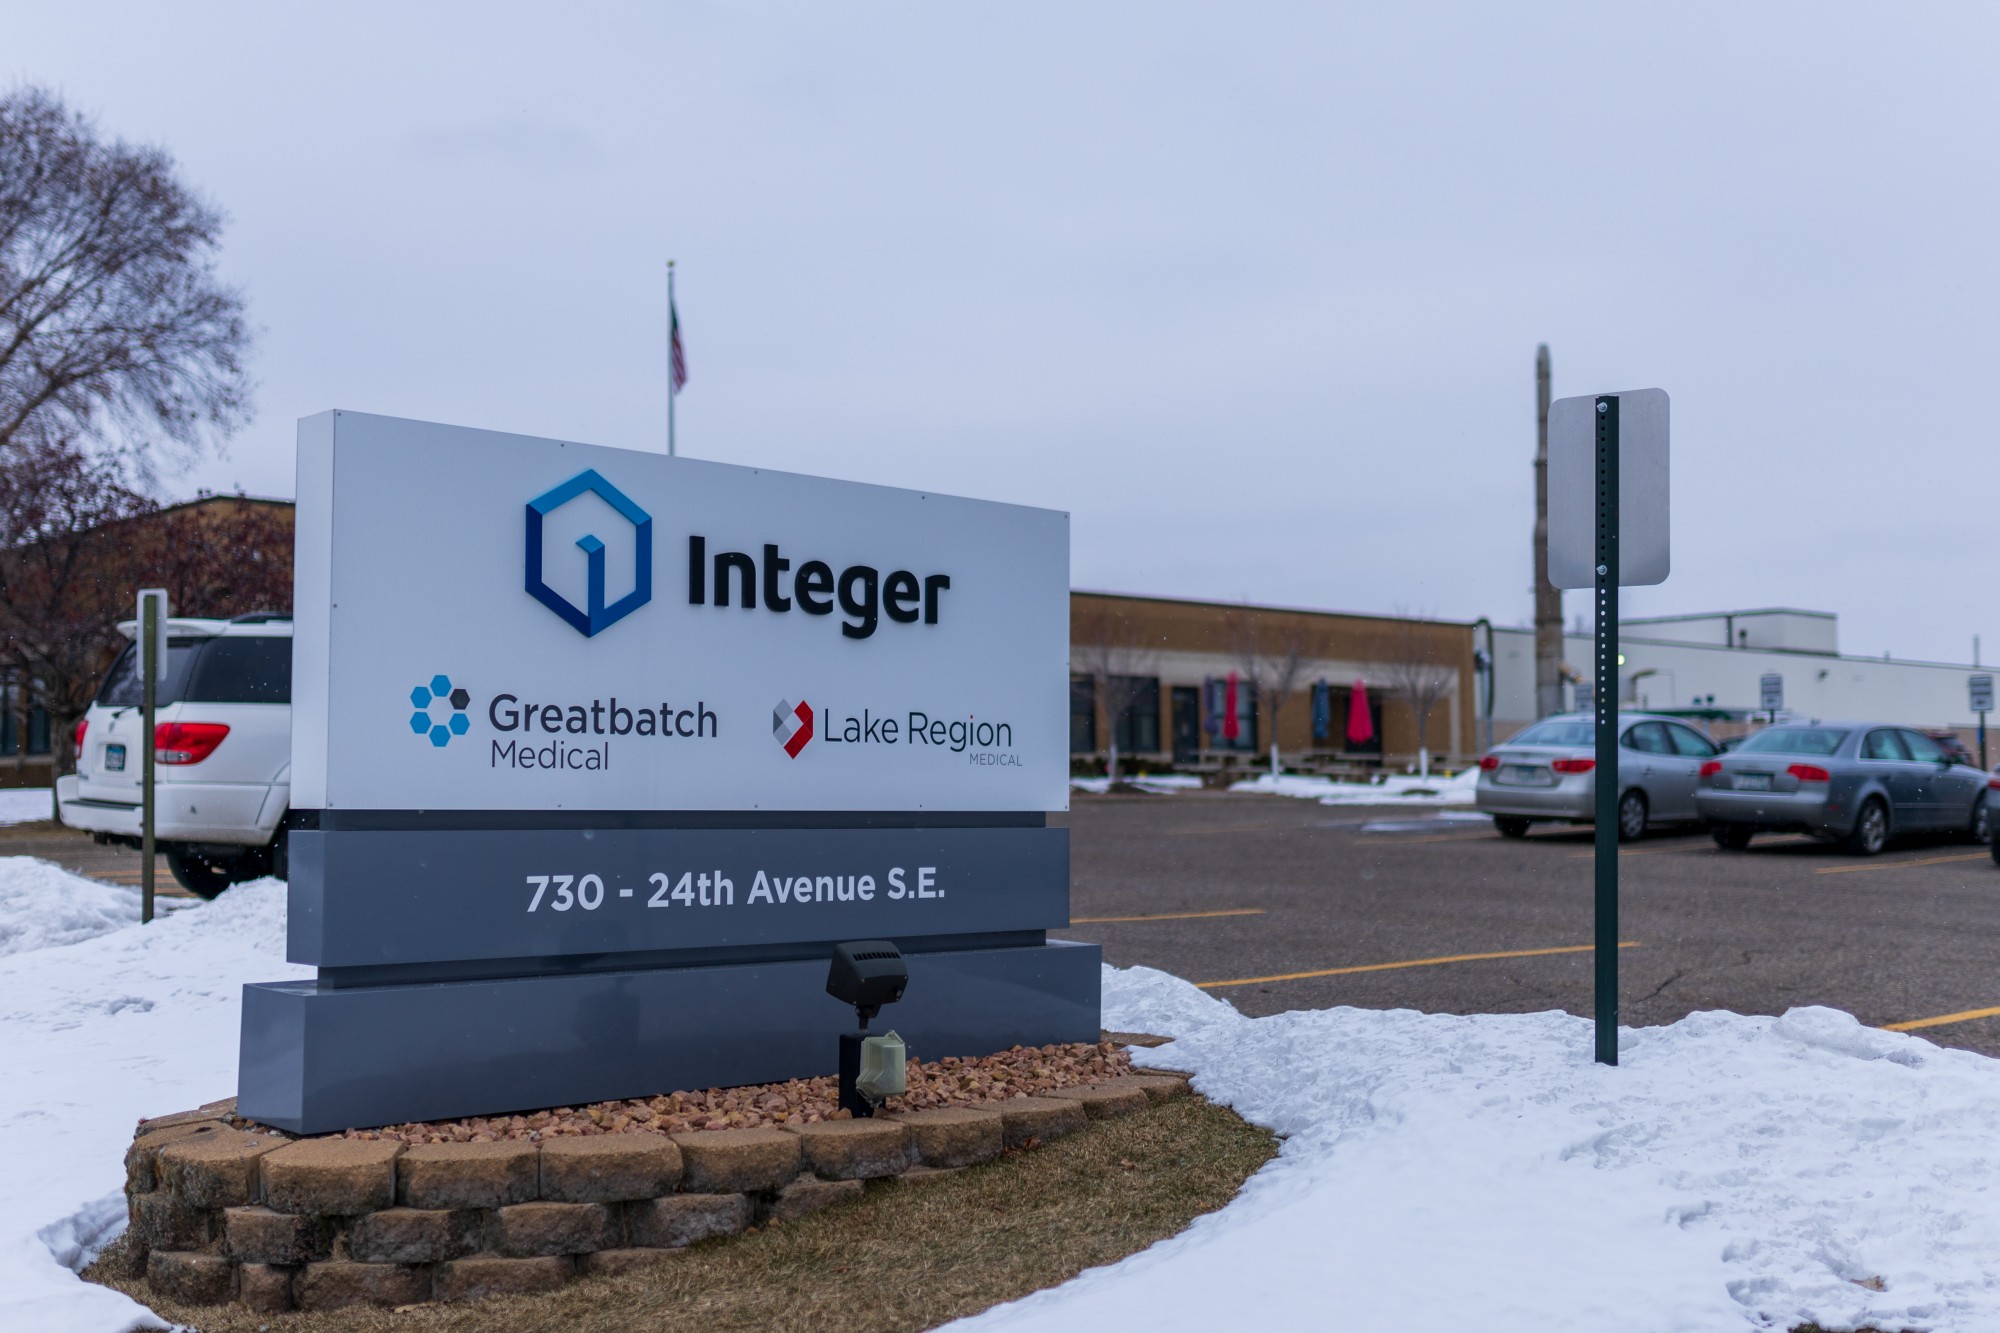 A building owned by Integer, a medical device outsource manufacturer, stands near the West Bank Campus on Friday, Feb. 7.  The site has recently been identified as producing higher than acceptable levels of trichloroethylene (TCE), an industrial solvent and carcinogen.